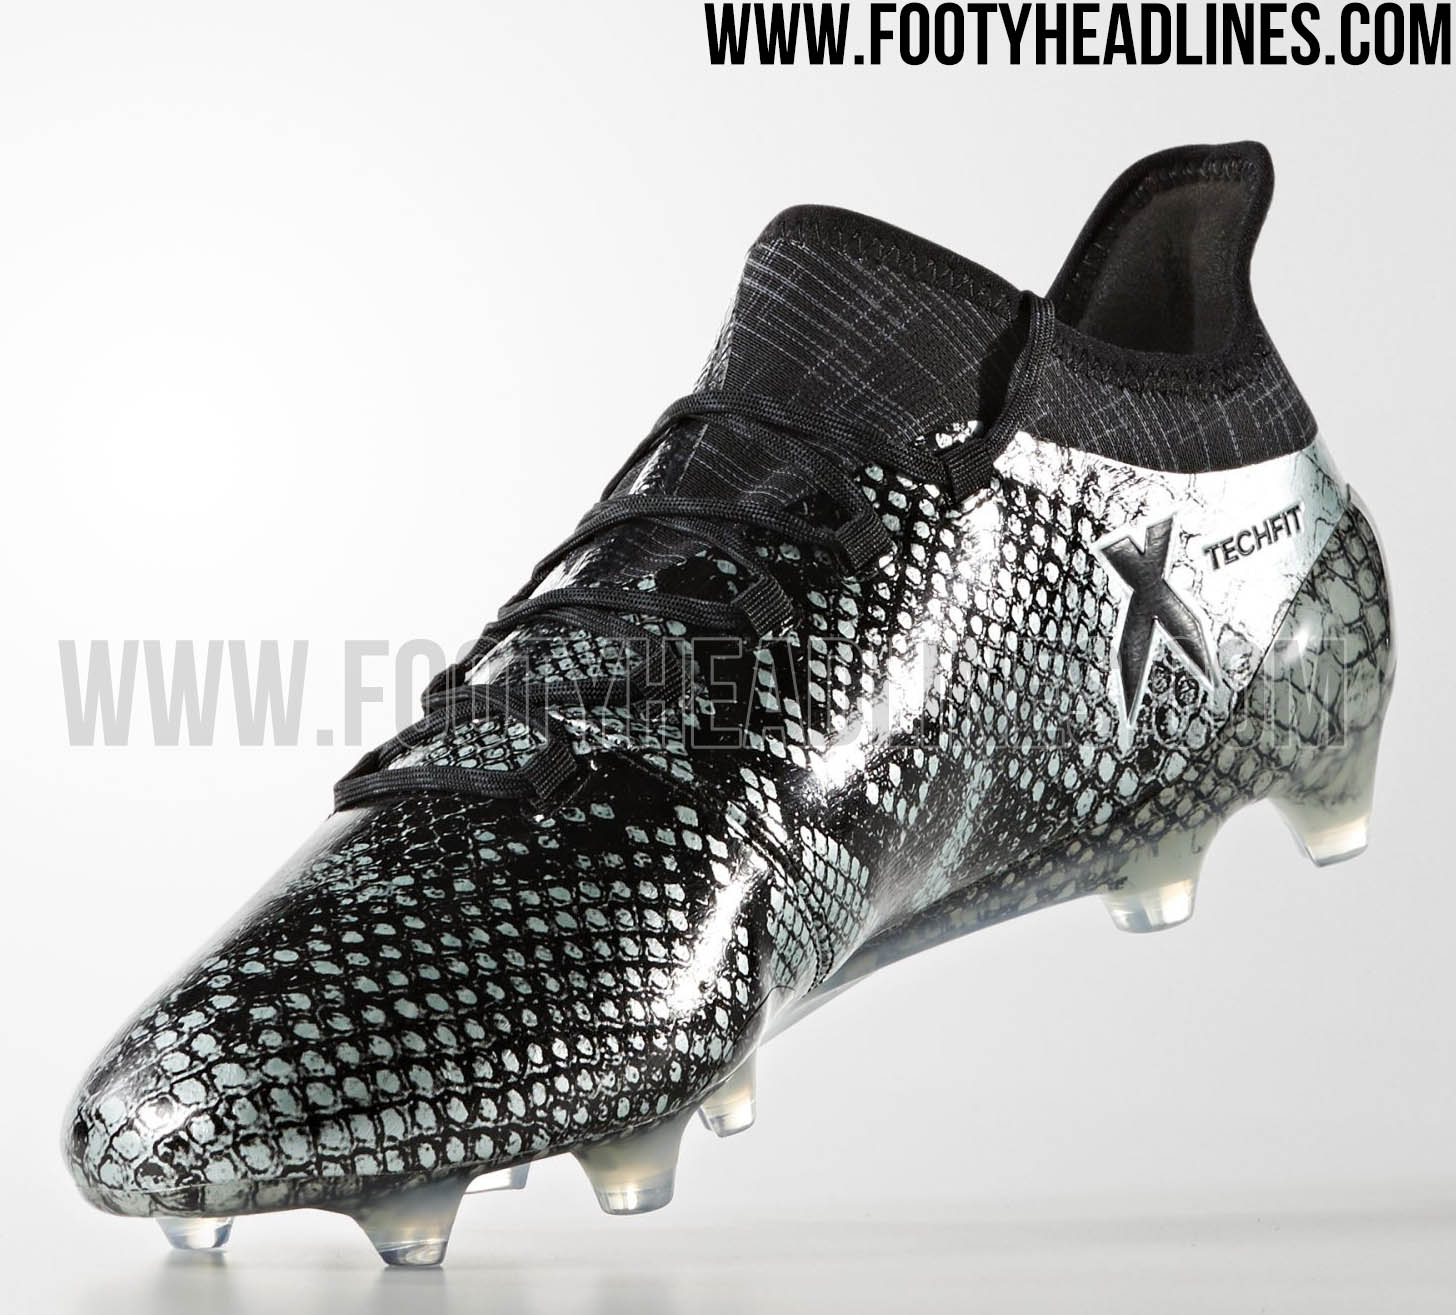 Vapour Adidas X 16 Viper Pack Boots Leaked - Headlines